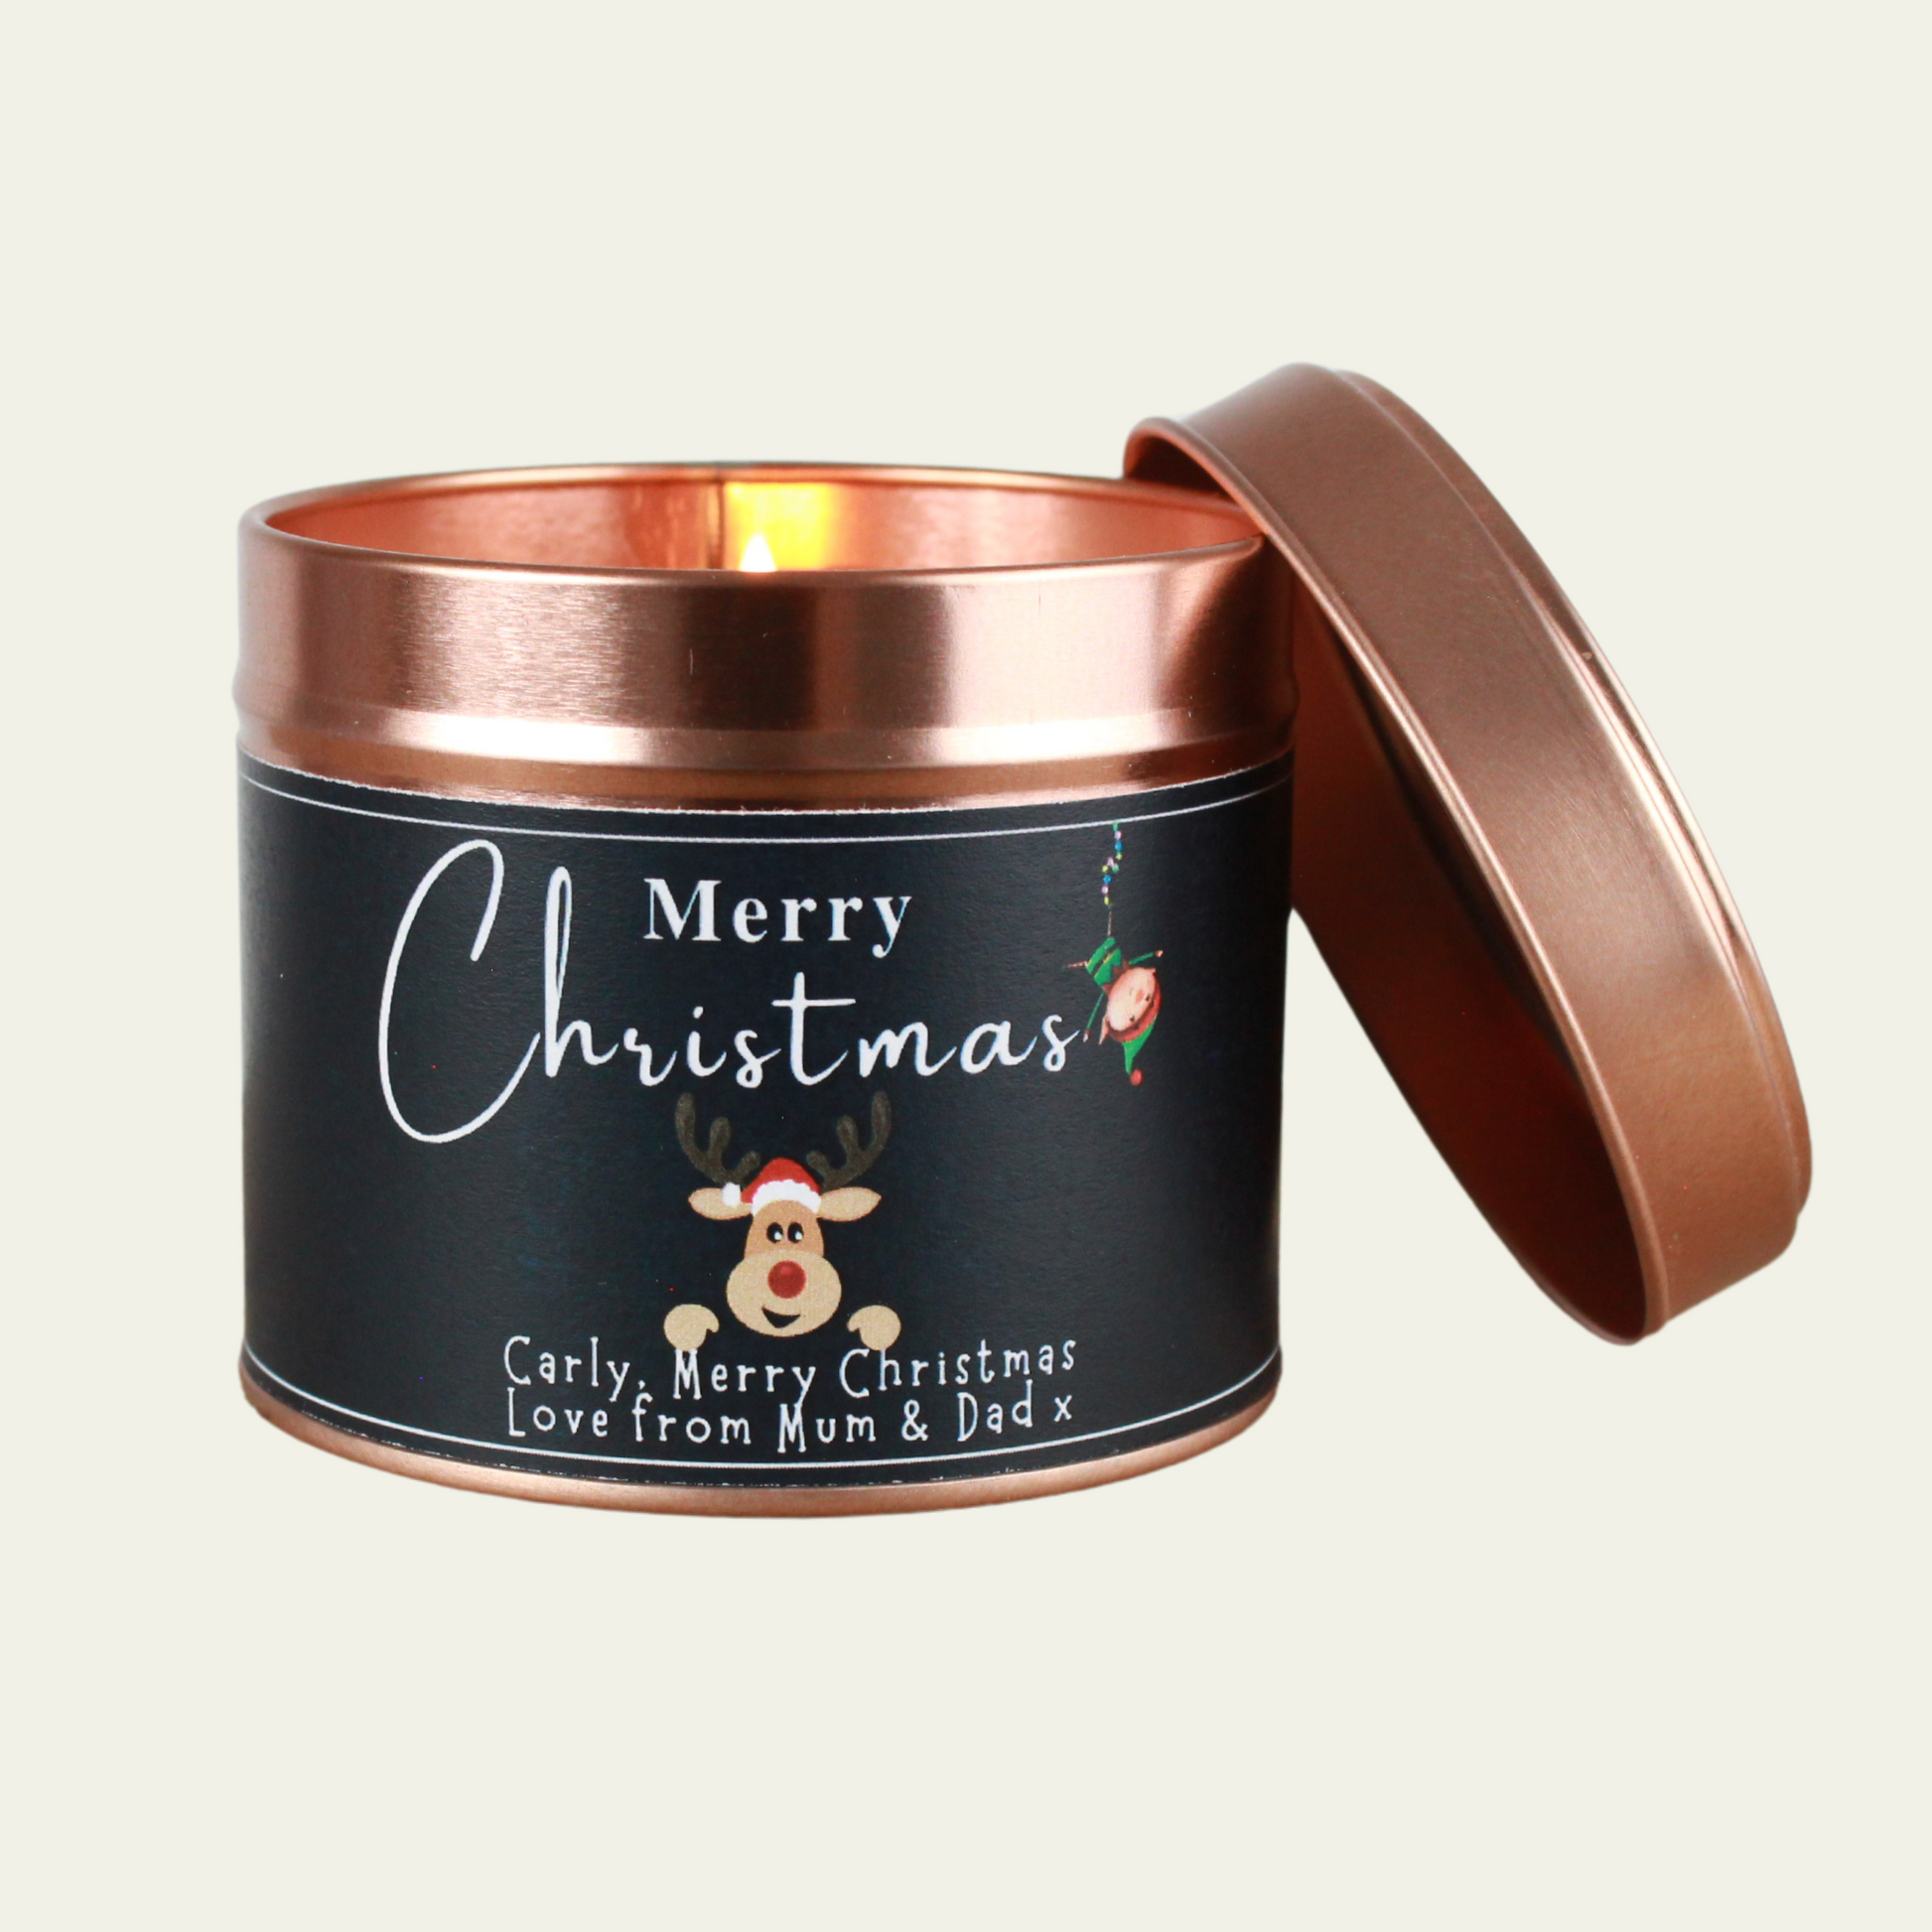 Merry Christmas Personalised Candle Gift - Hideaway Home Fragrances